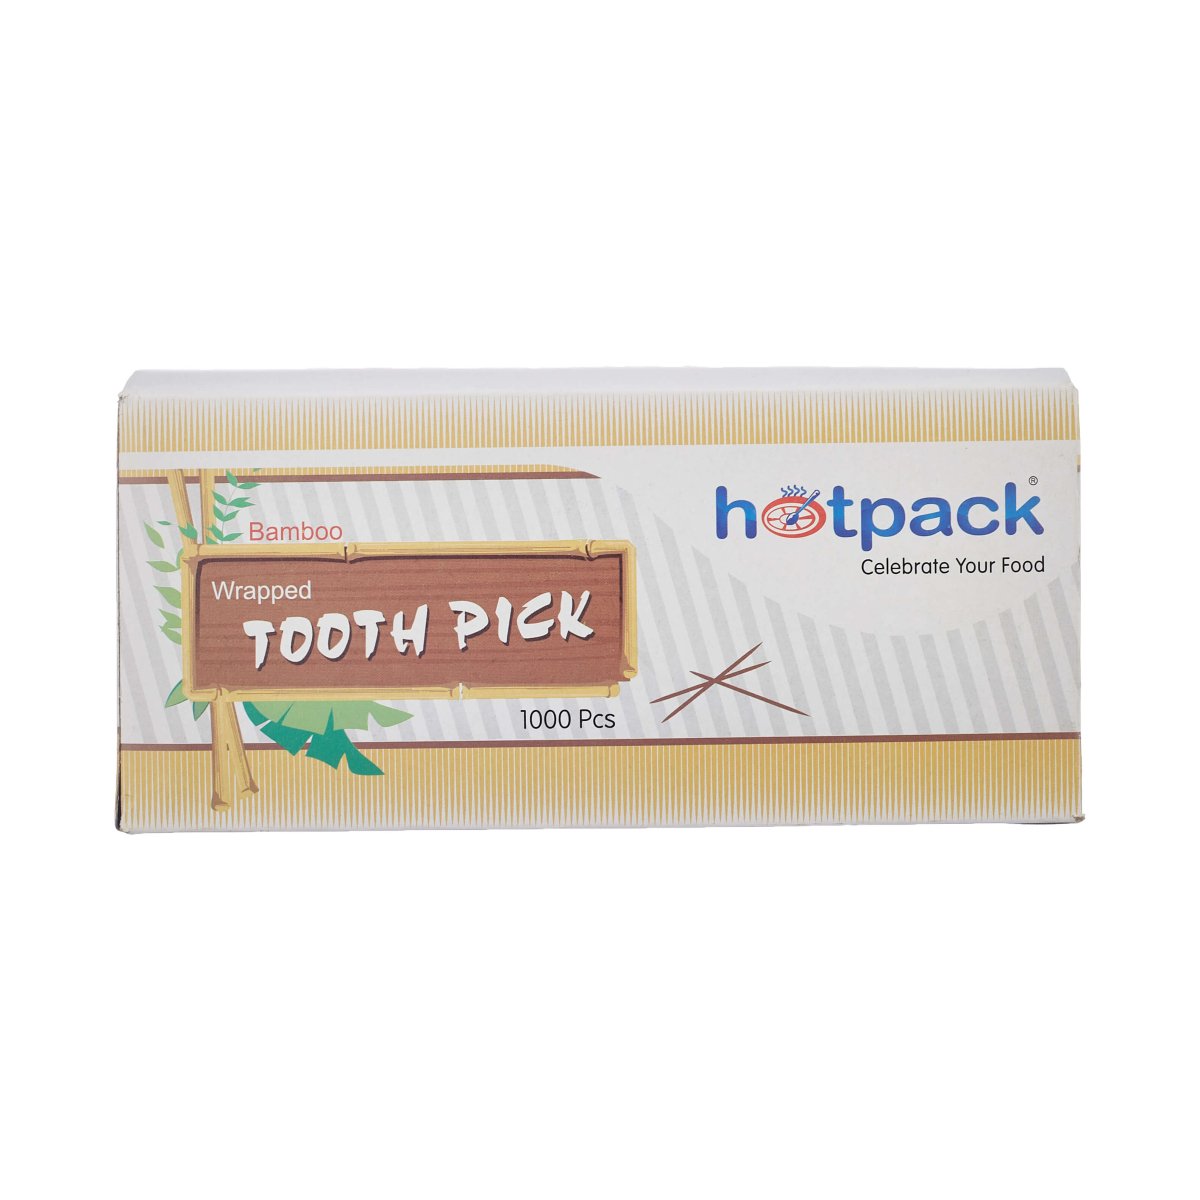 Wrapped Tooth Pick - hotpackwebstore.com - Toothpick